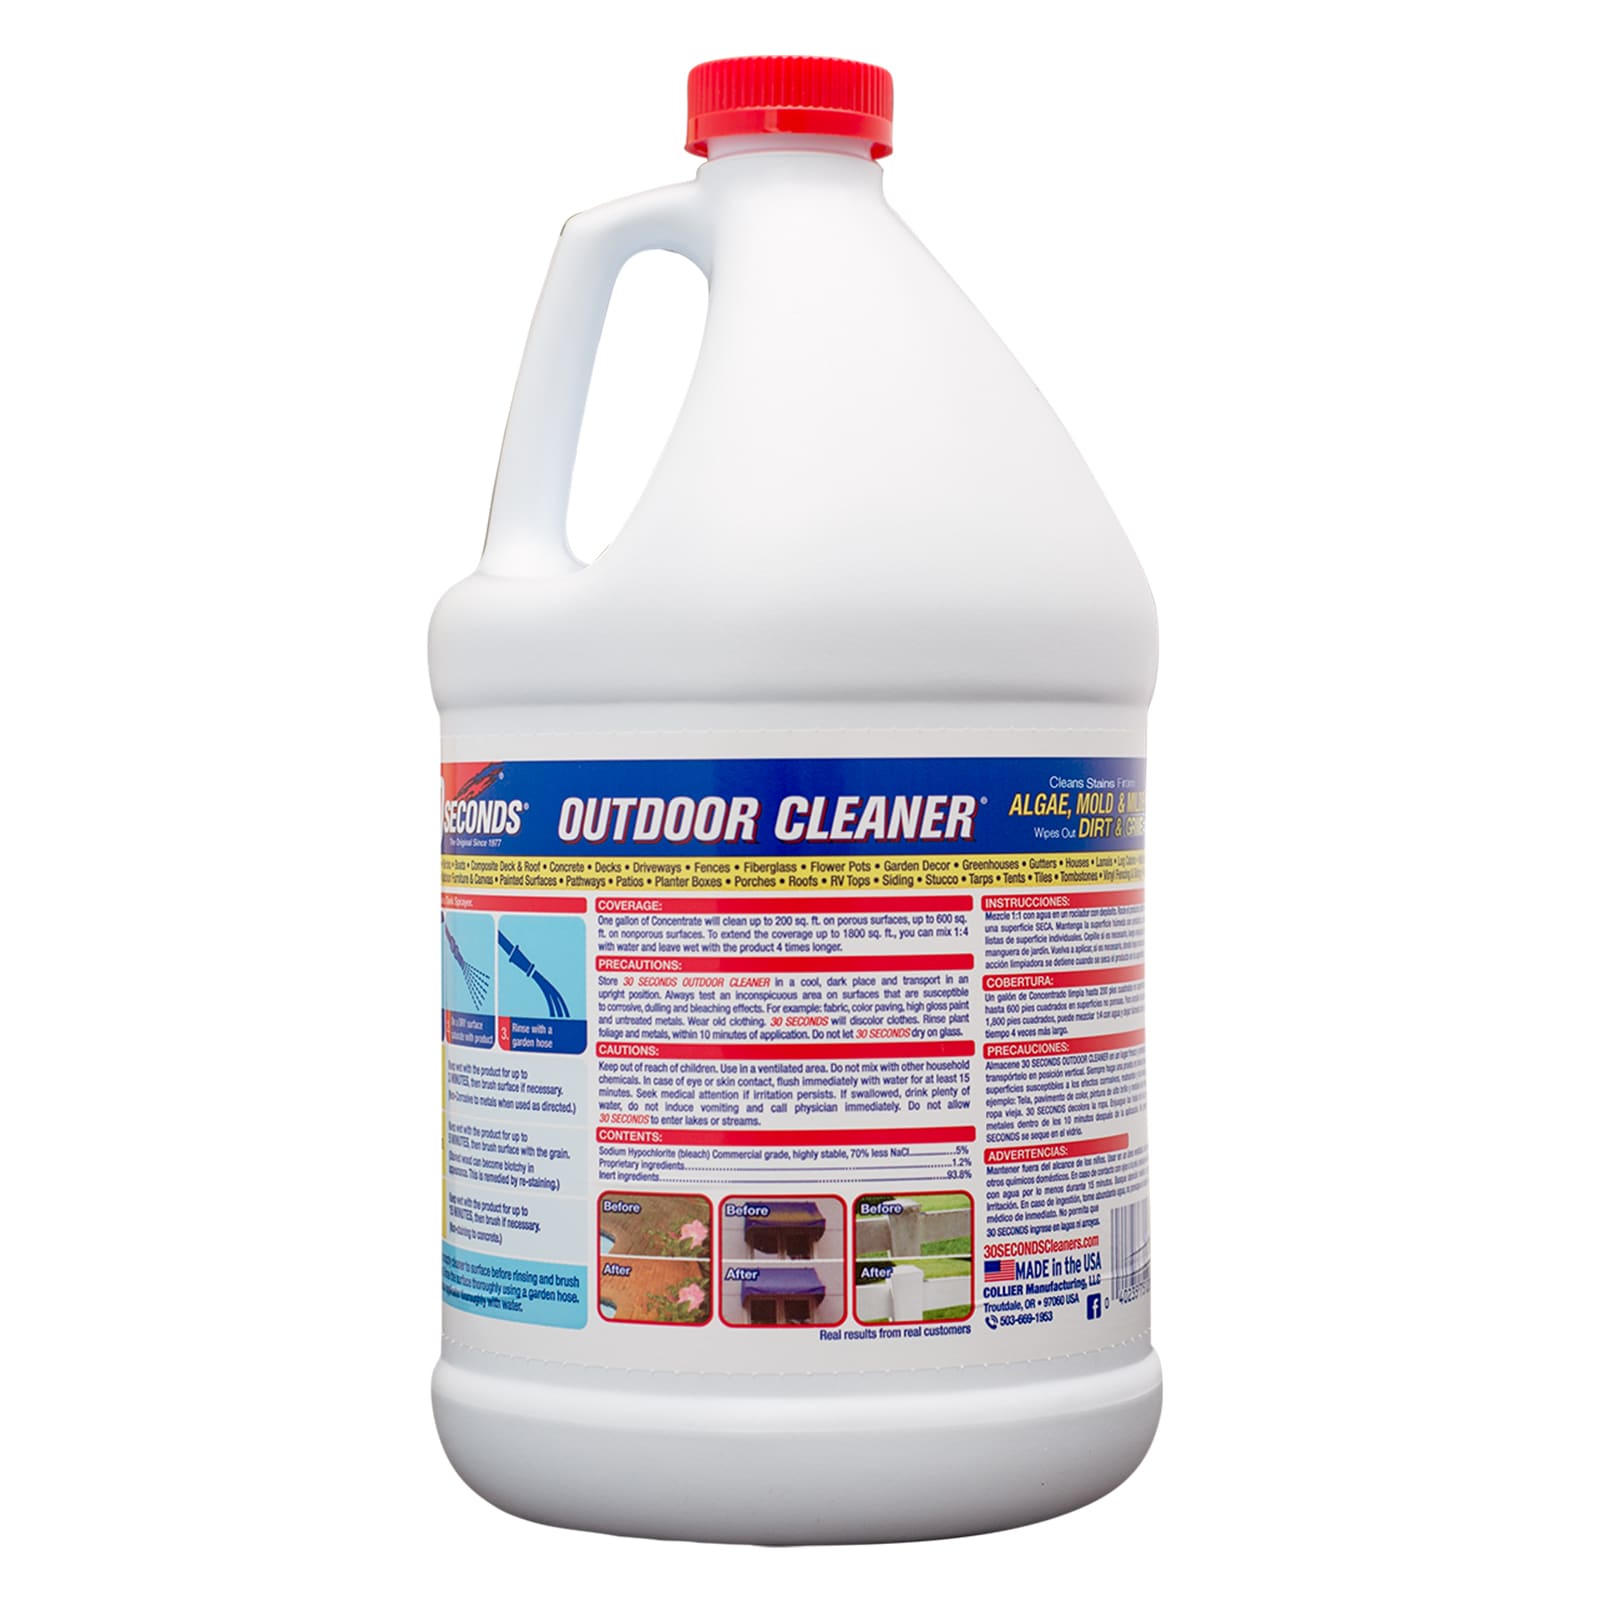 Marine 31 Mildew Stain Remover & Cleaner - Marine & Boat, Home & Patio,  Bathroom & Shower Cleaner